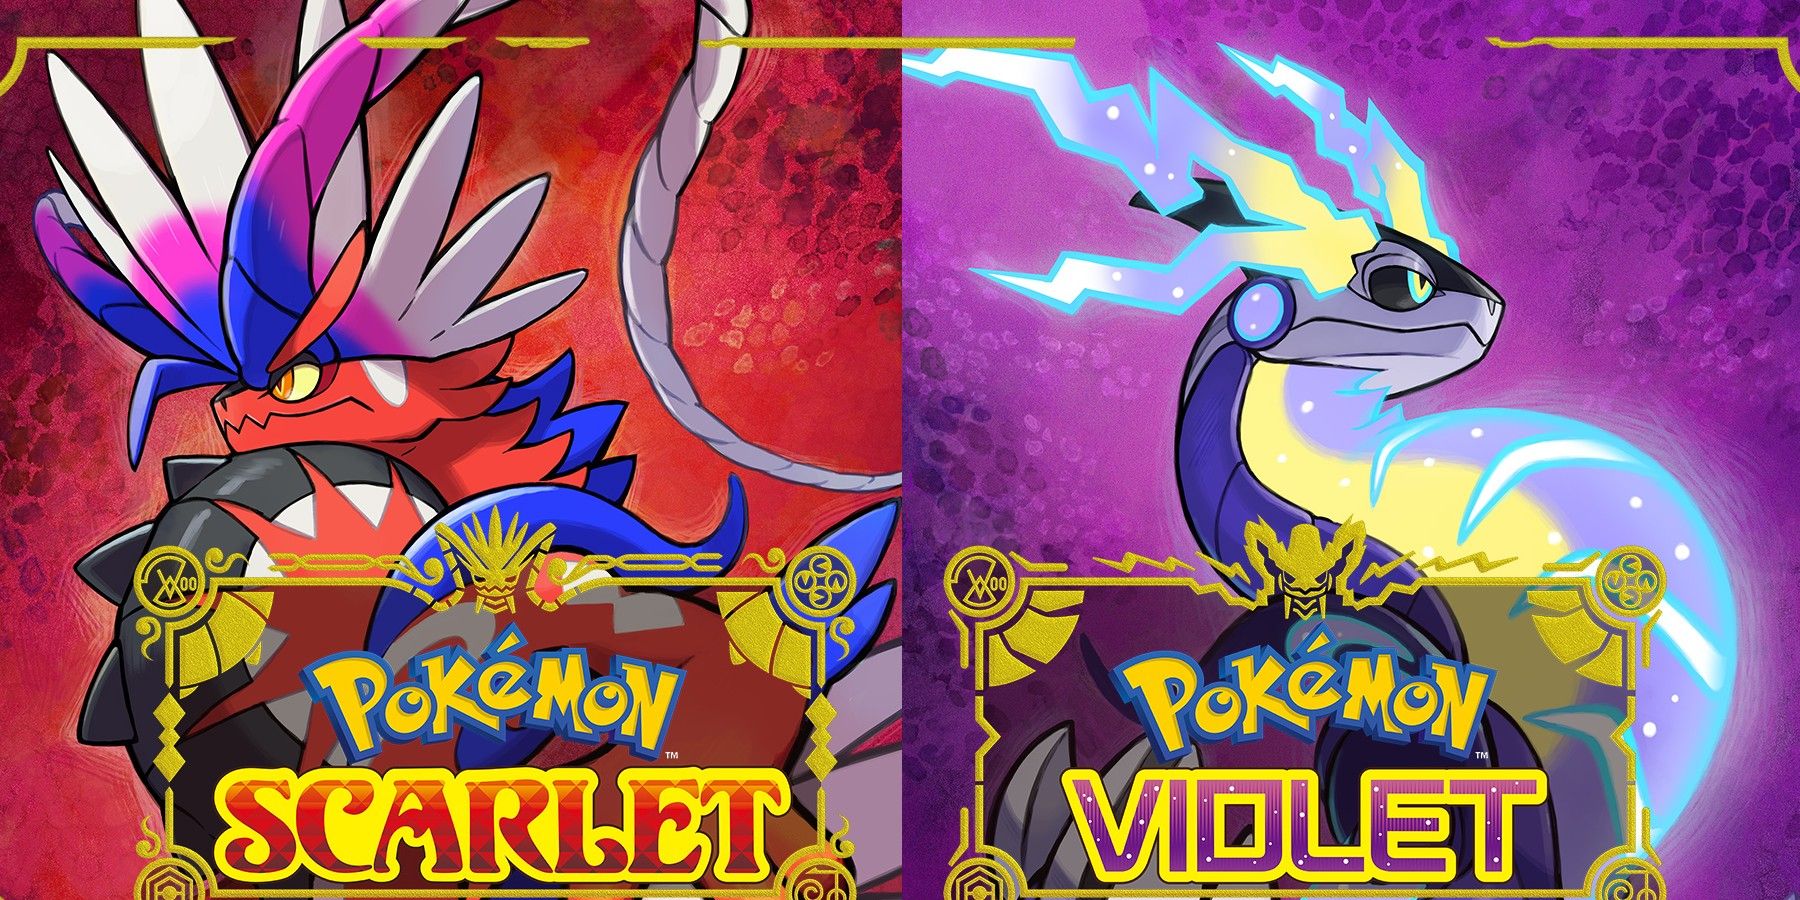 Pokemon Scarlet and Violet Ditto Transforms Into
Itself